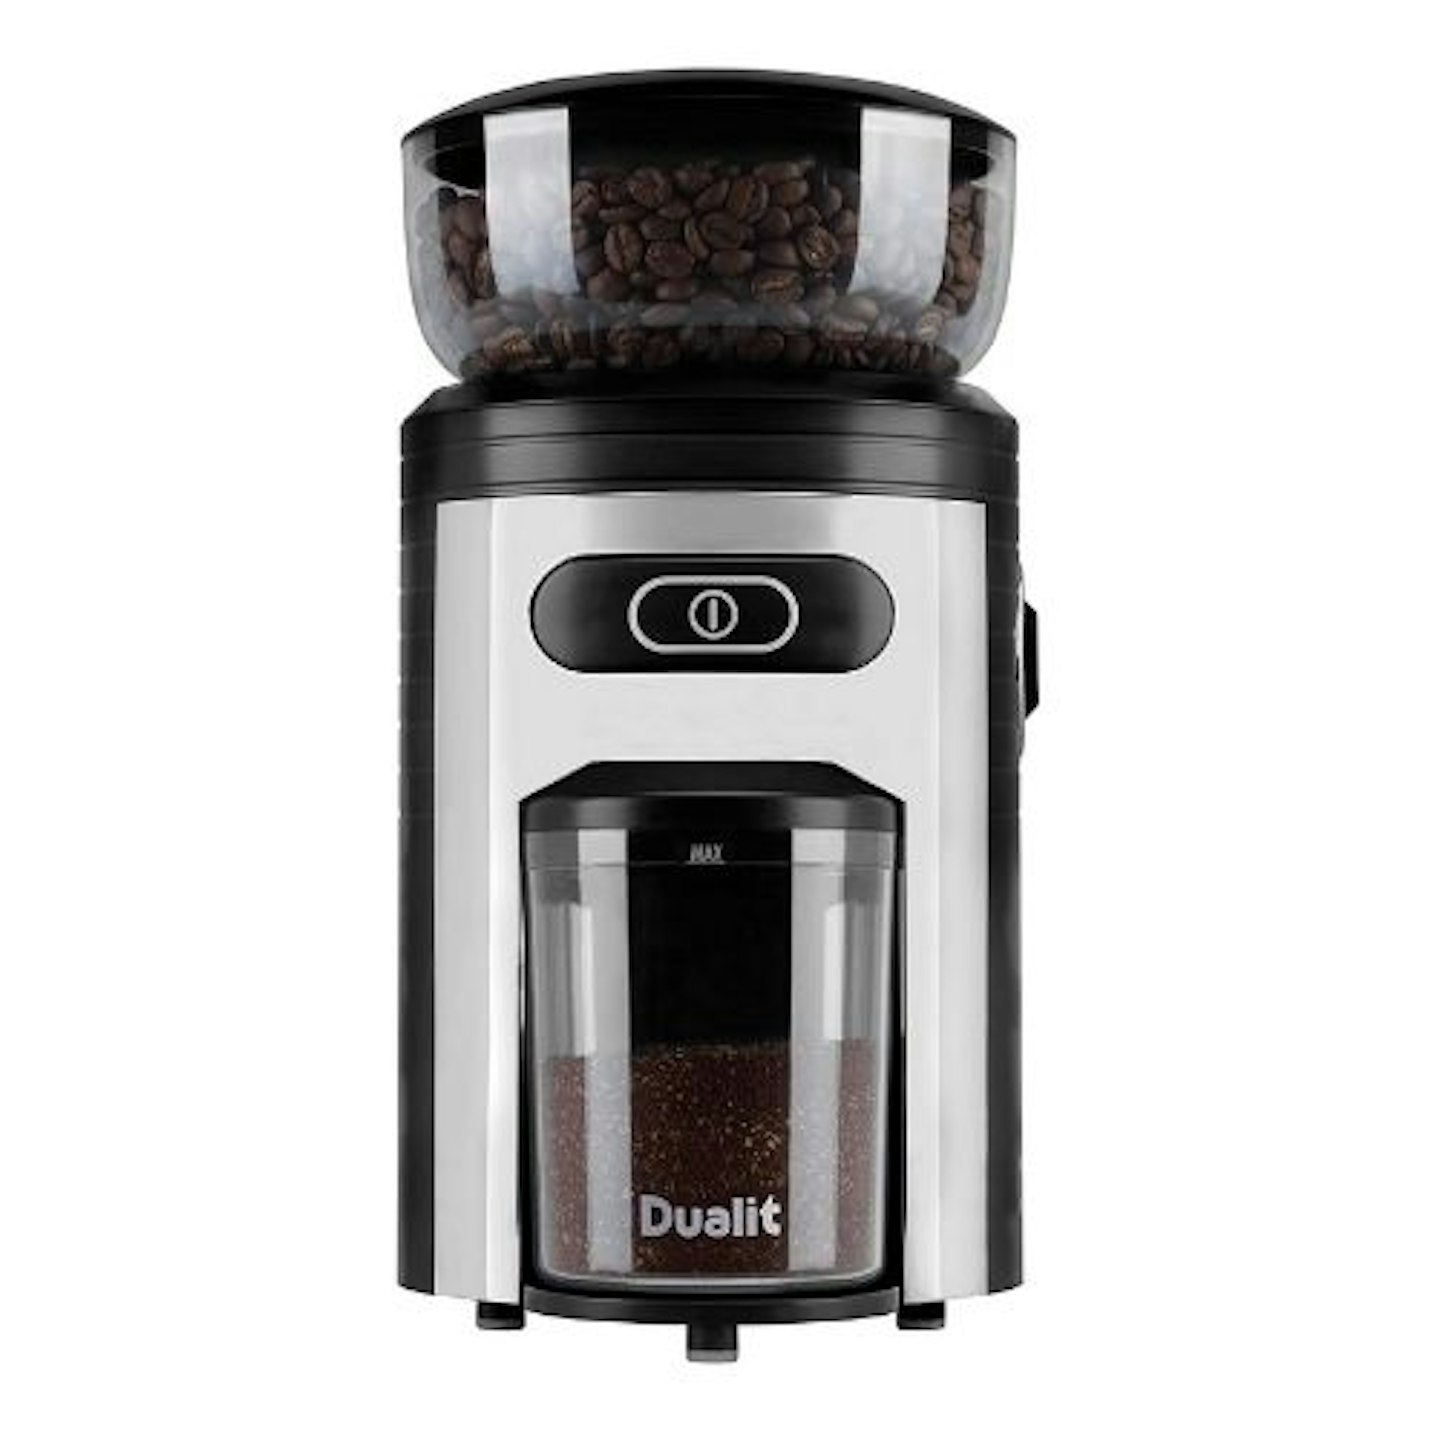 Dualit burr coffee grinder on white background